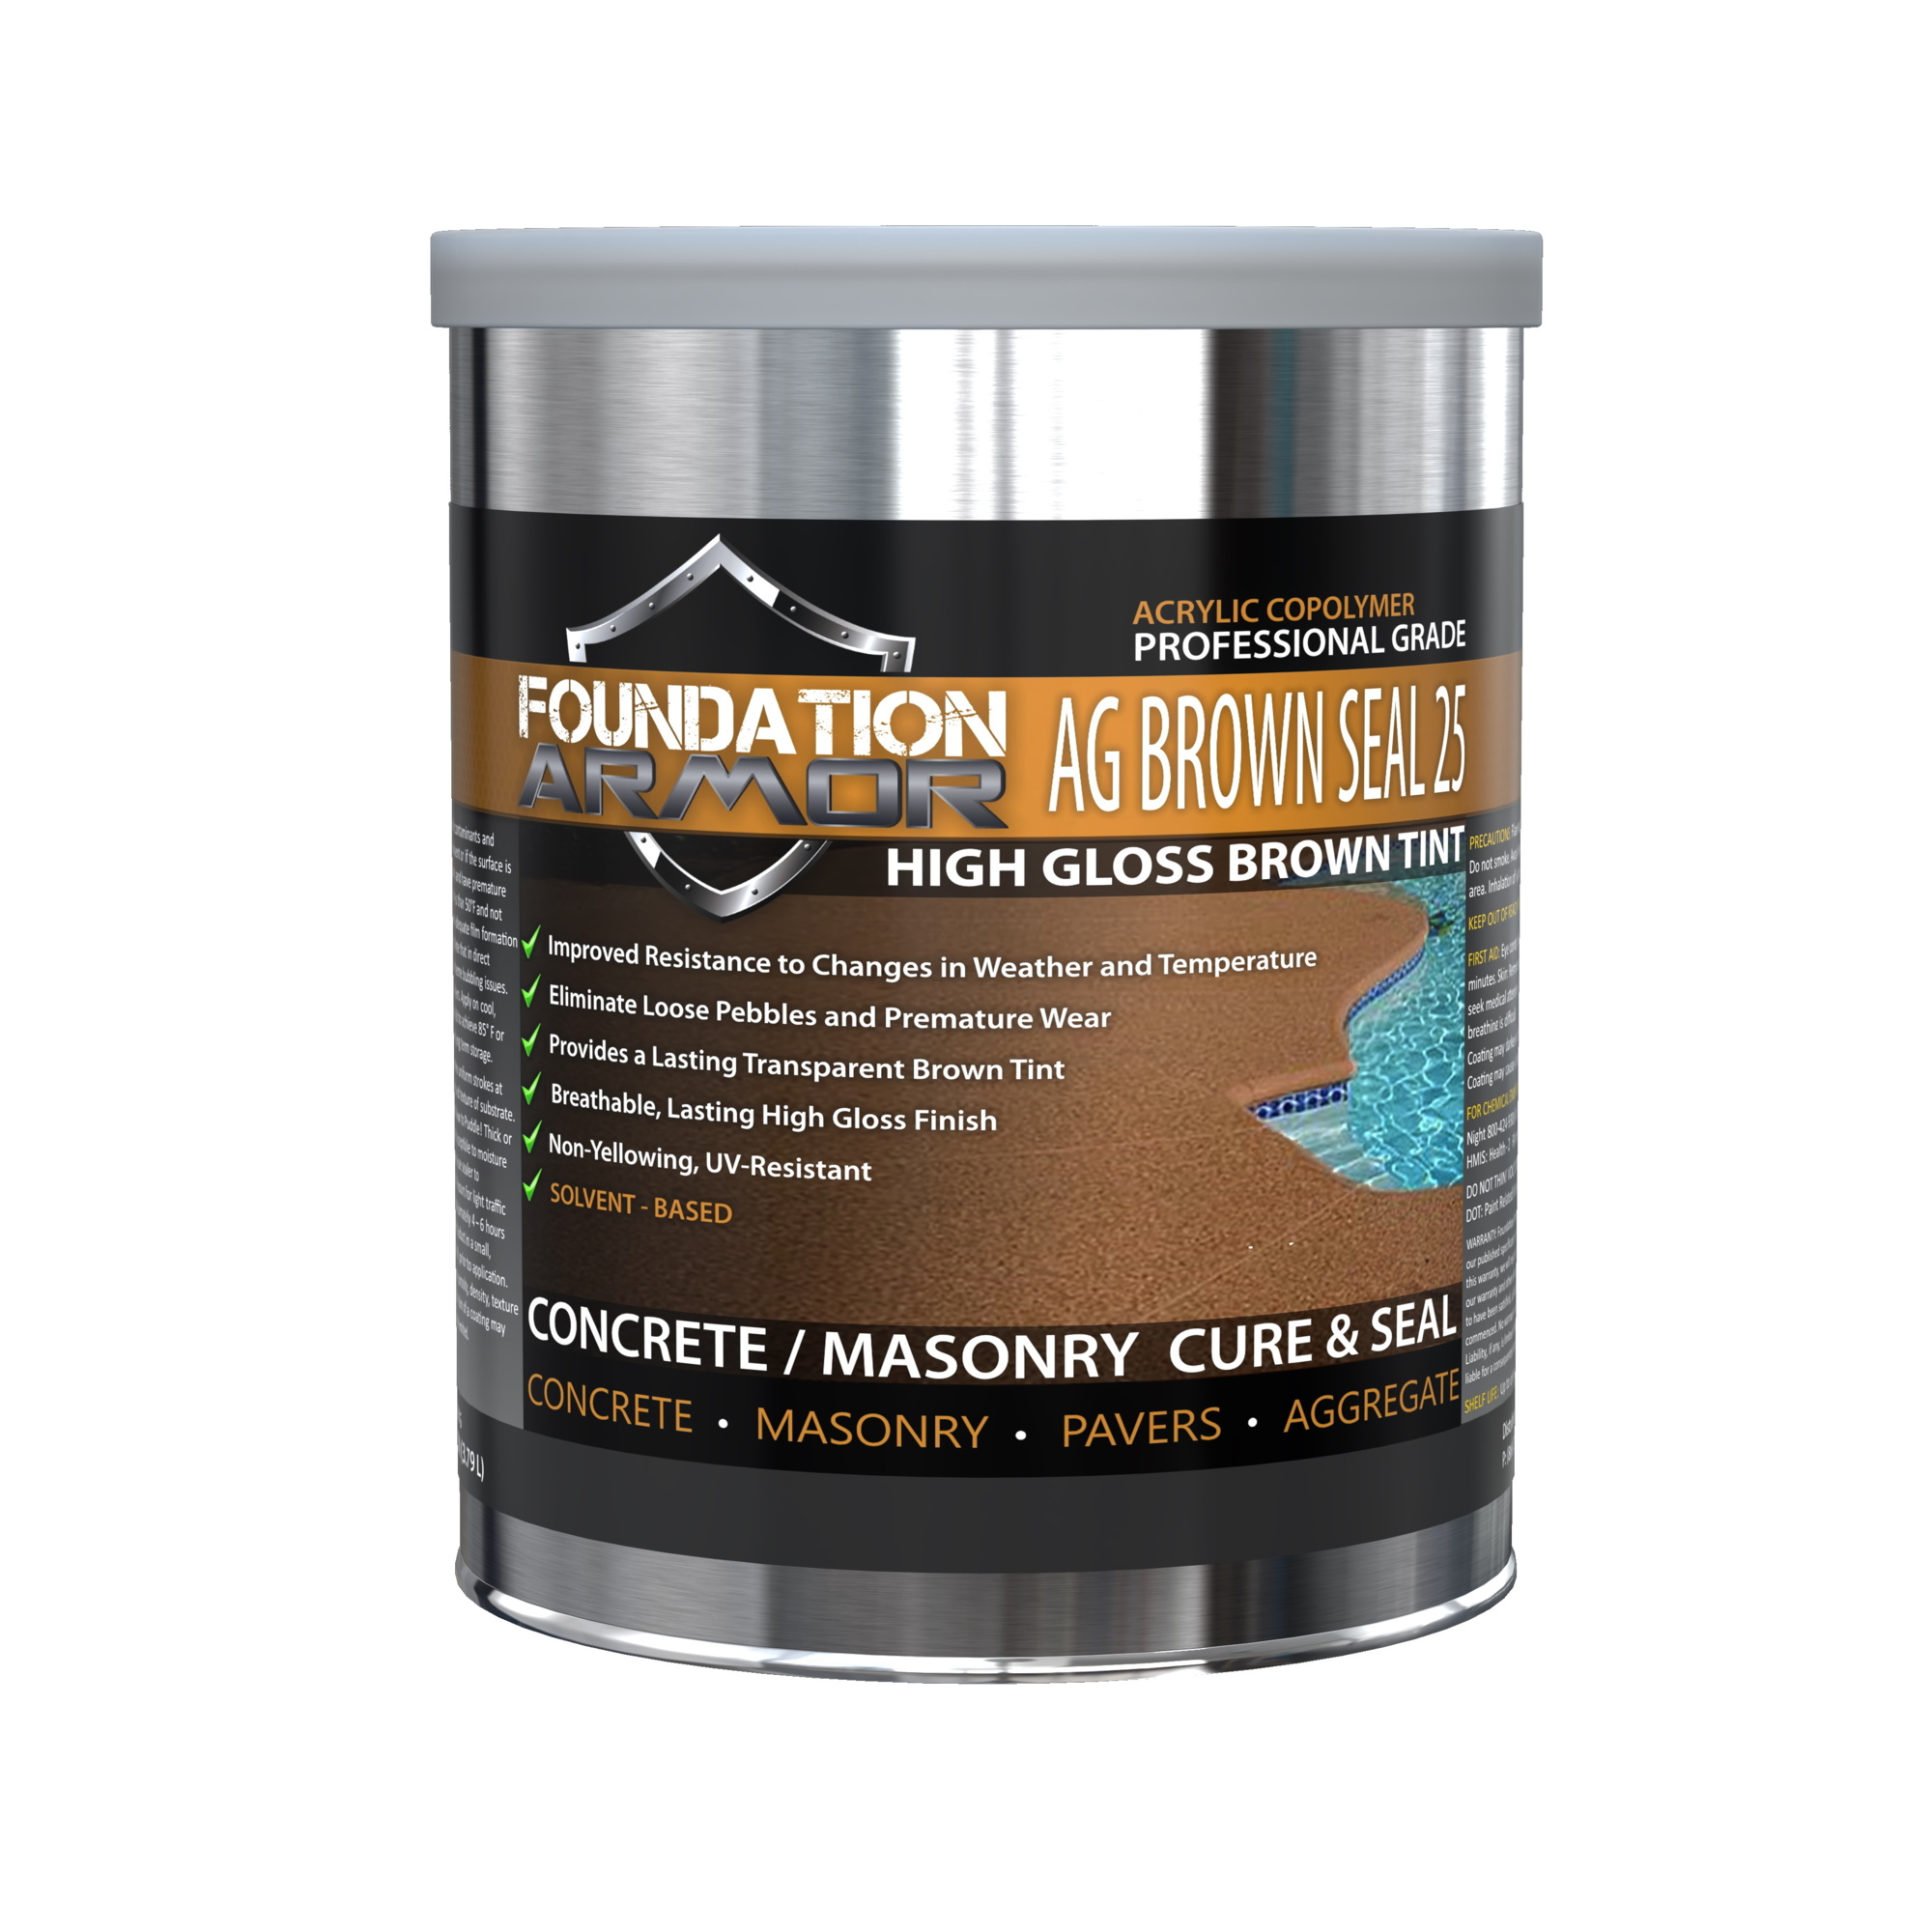 Foundation Armor, Brown-Tinted High Gloss Concrete Sealer, Container Size 1 Gallon, Color Transparent Brown, Application Method Sprayer or Roller,